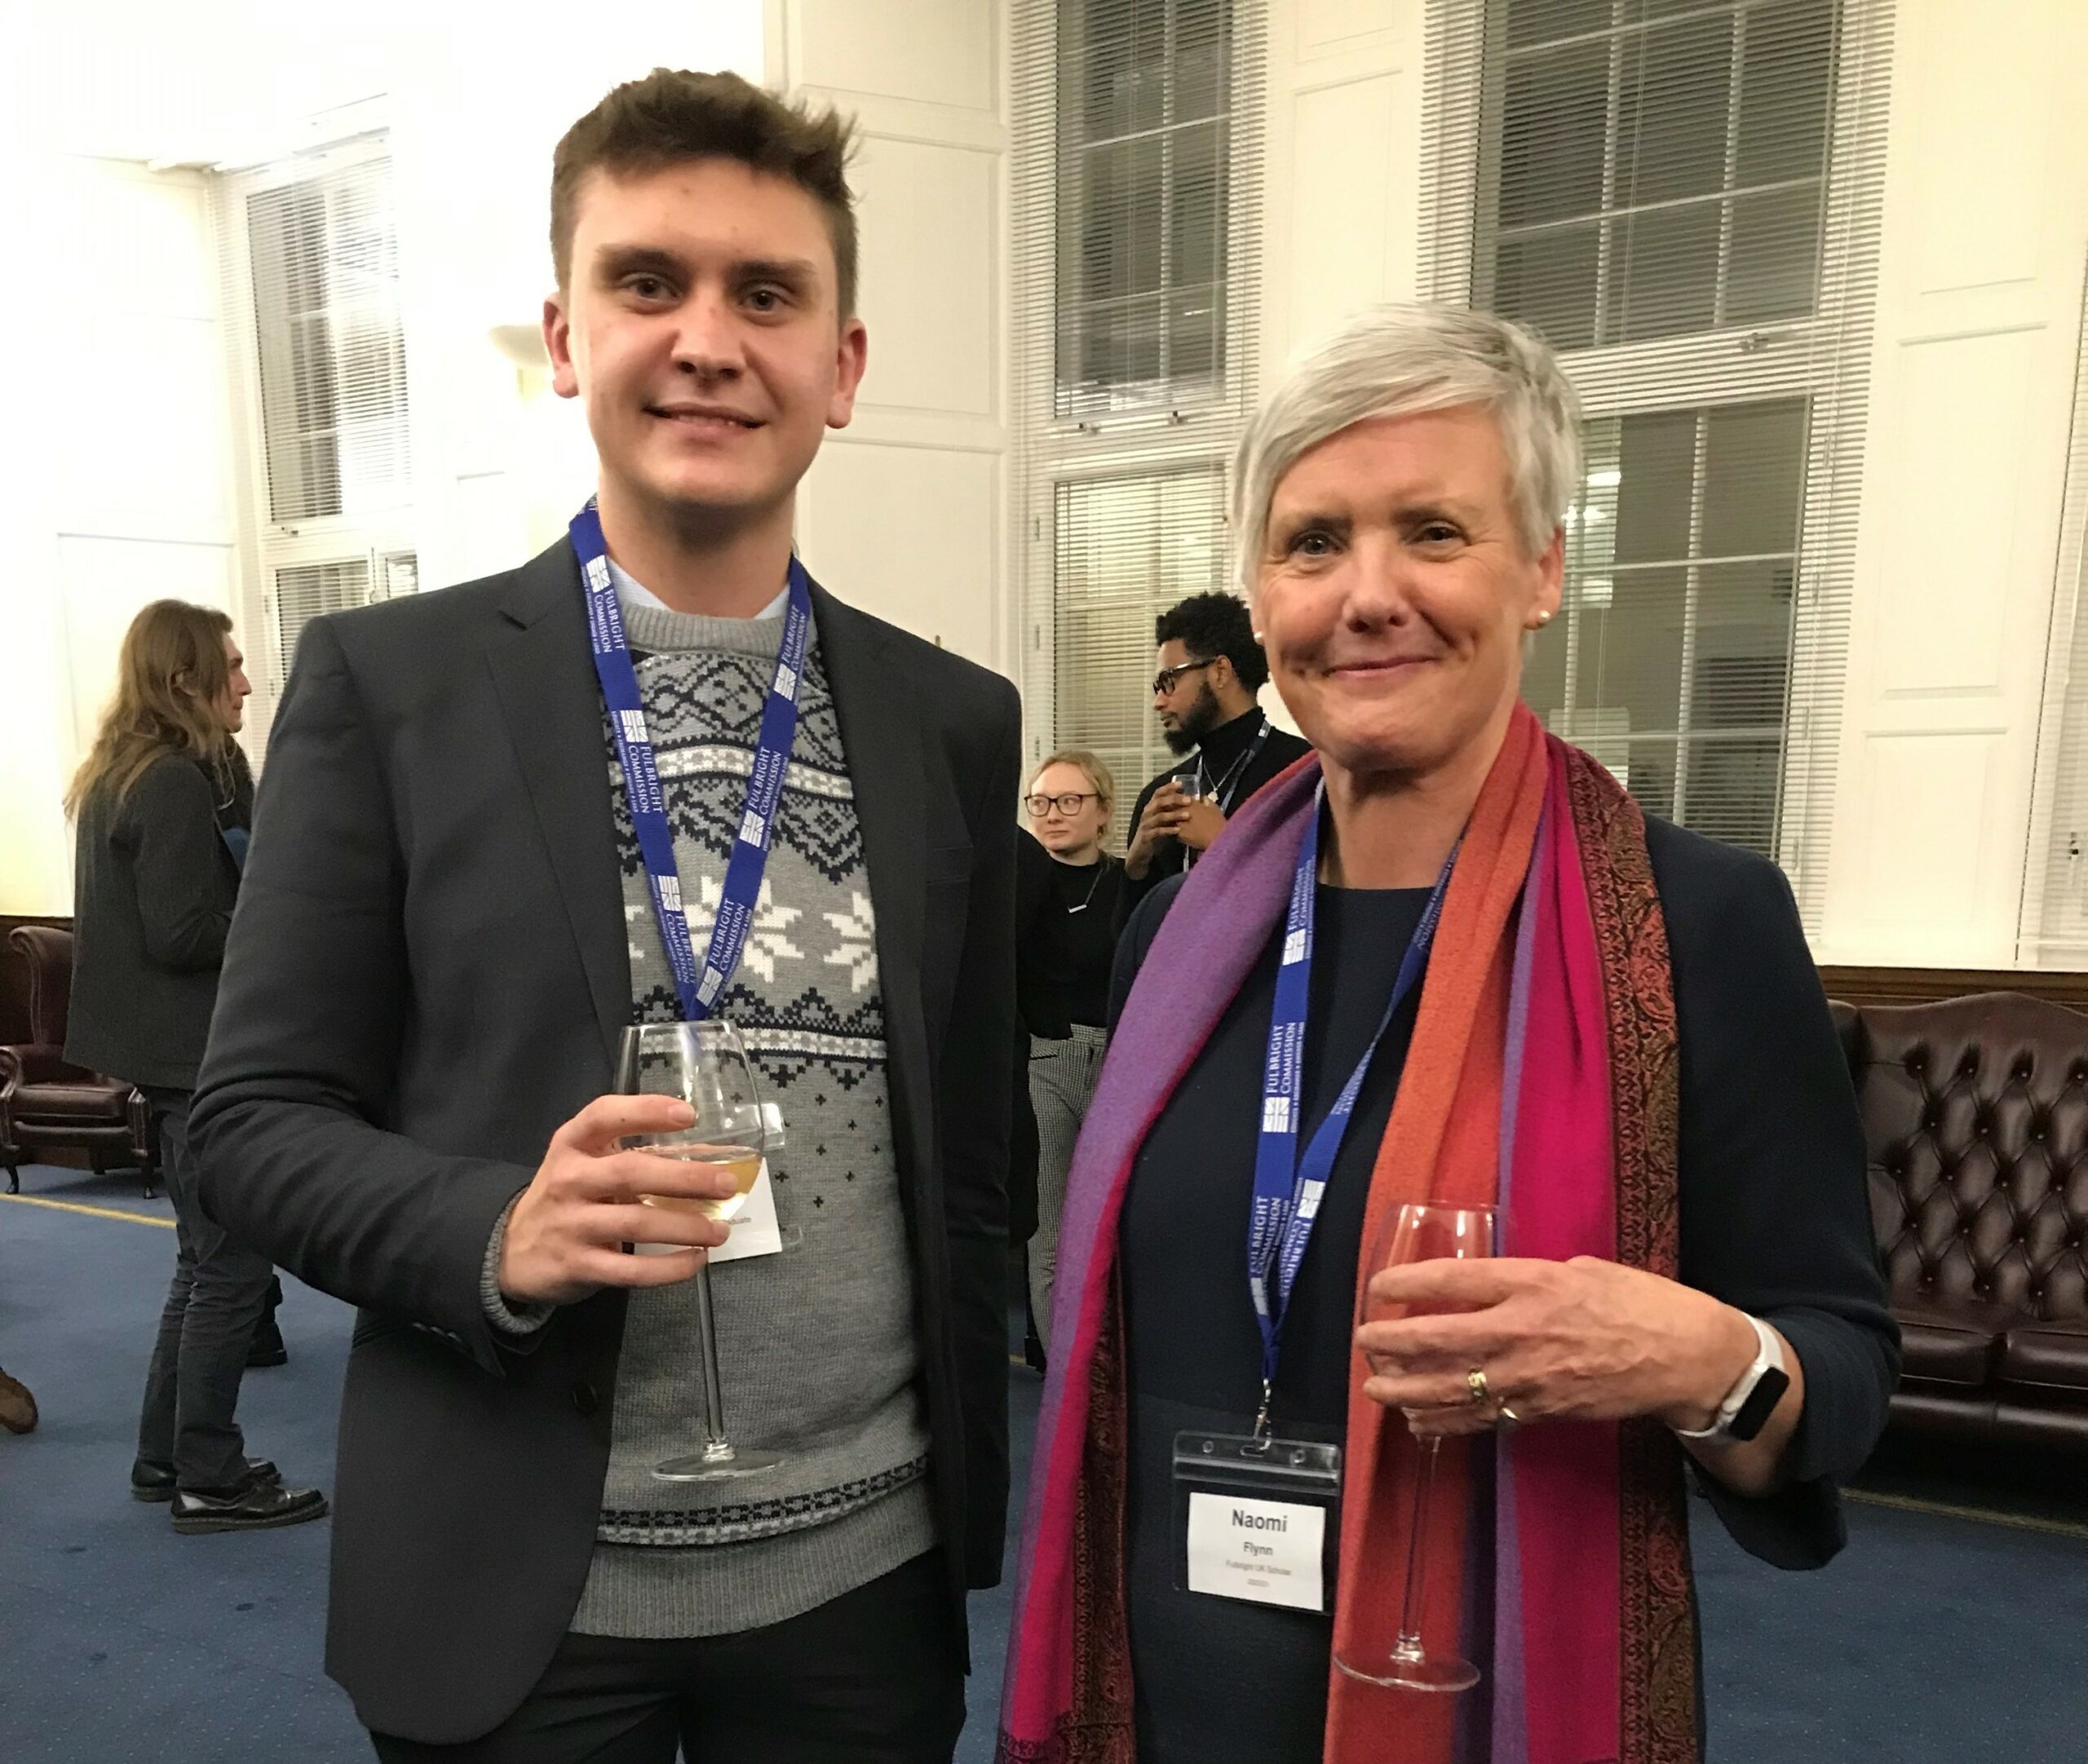 NEWS – Two Fulbright scholars from the University of Reading’s Institute of Education celebrate their research journeys in London